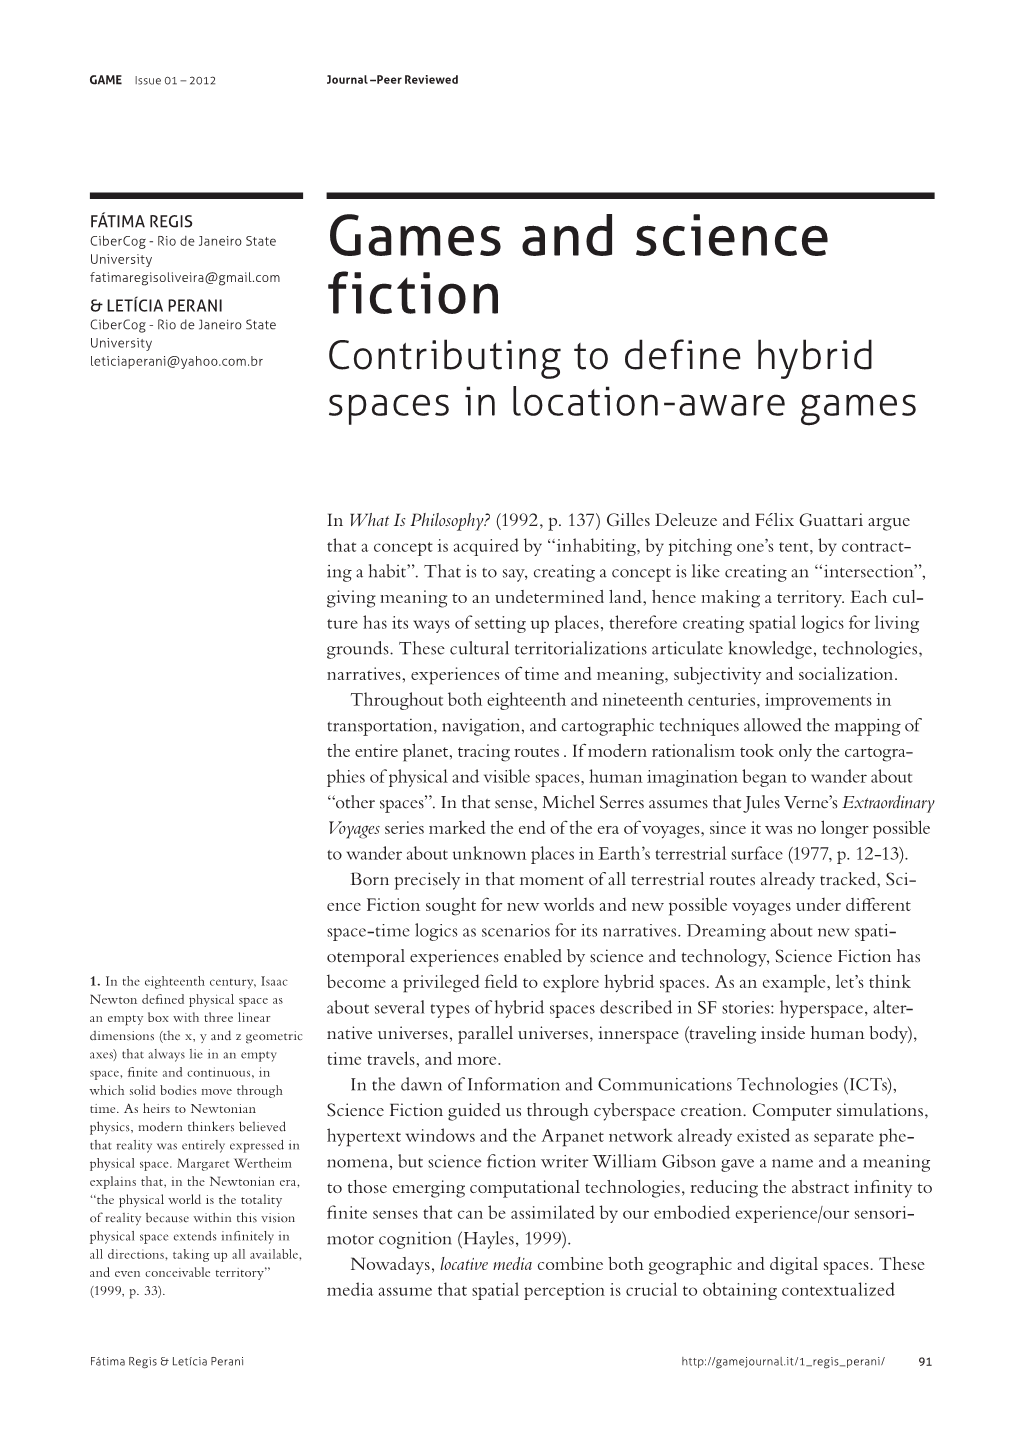 Games and Science Fiction